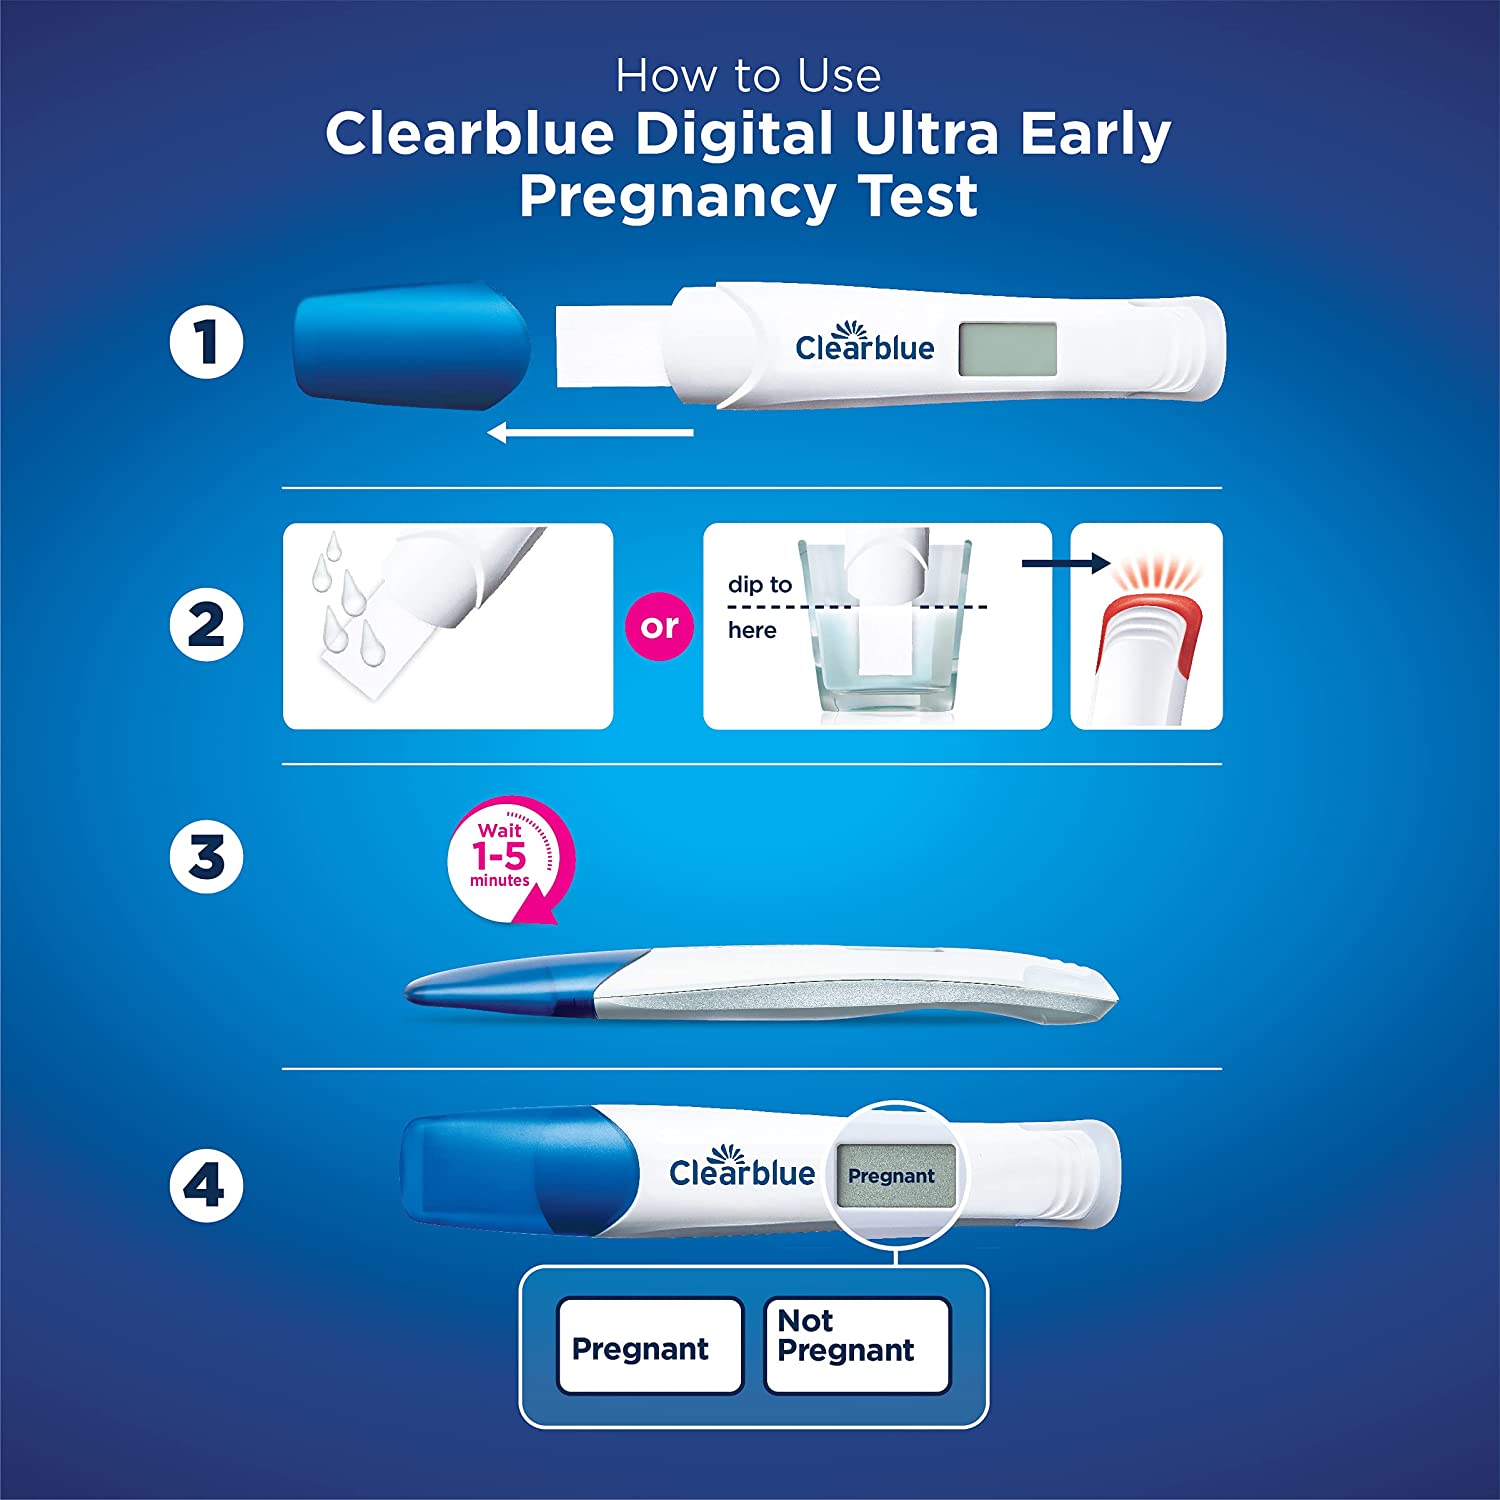 When to test with clearblue ultra early pregnancy test?